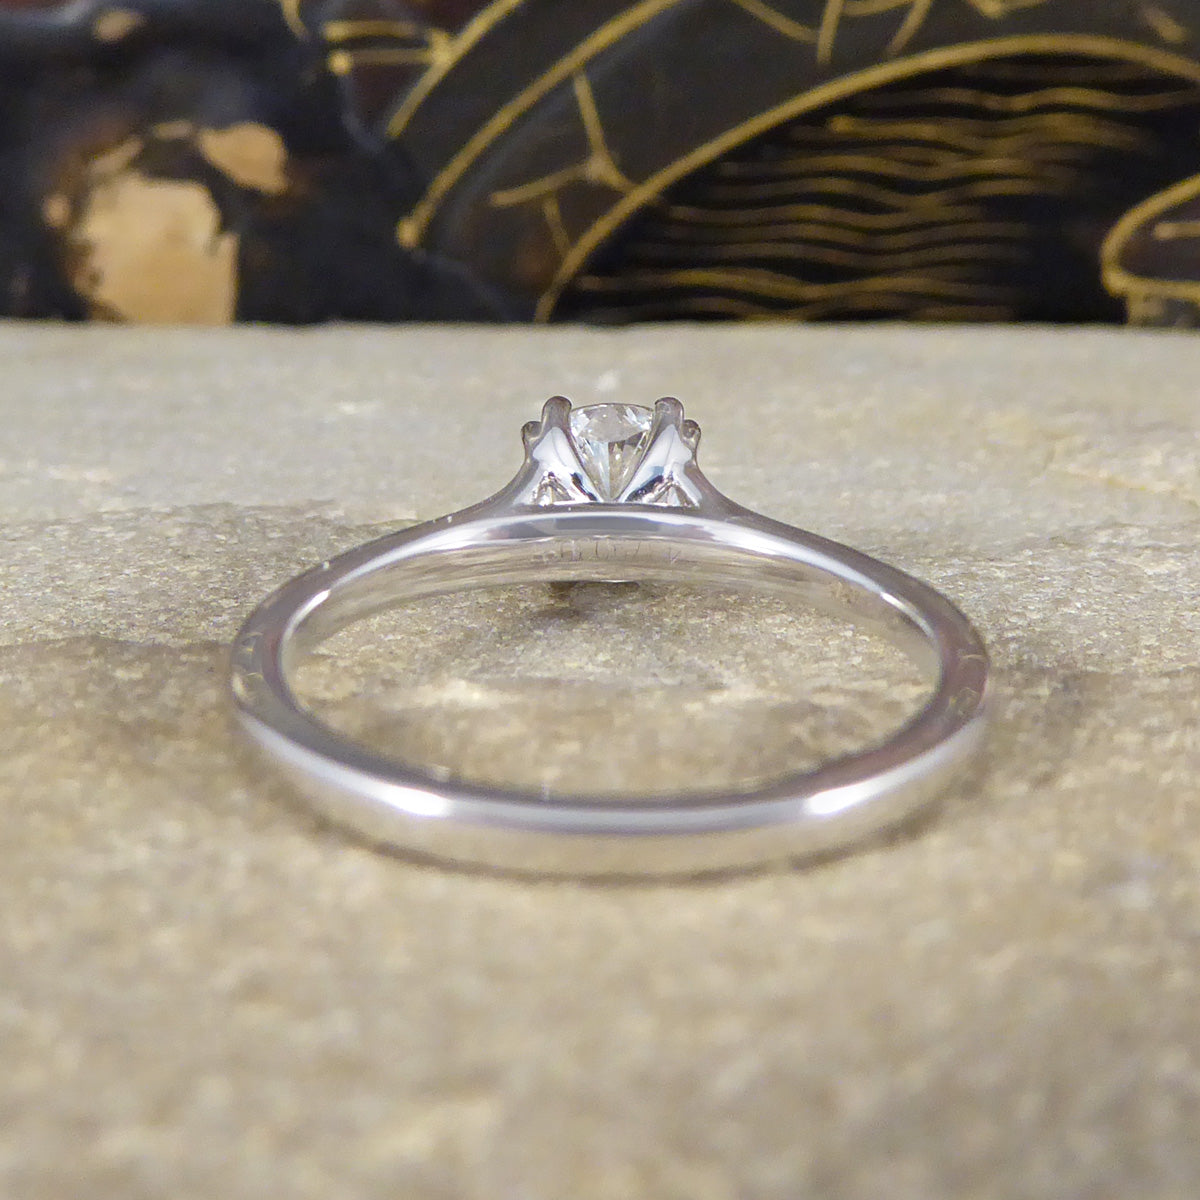 1.00ct Cushion Modified Brilliant Cut Diamond Solitaire Engagement Ring in 18ct White Gold